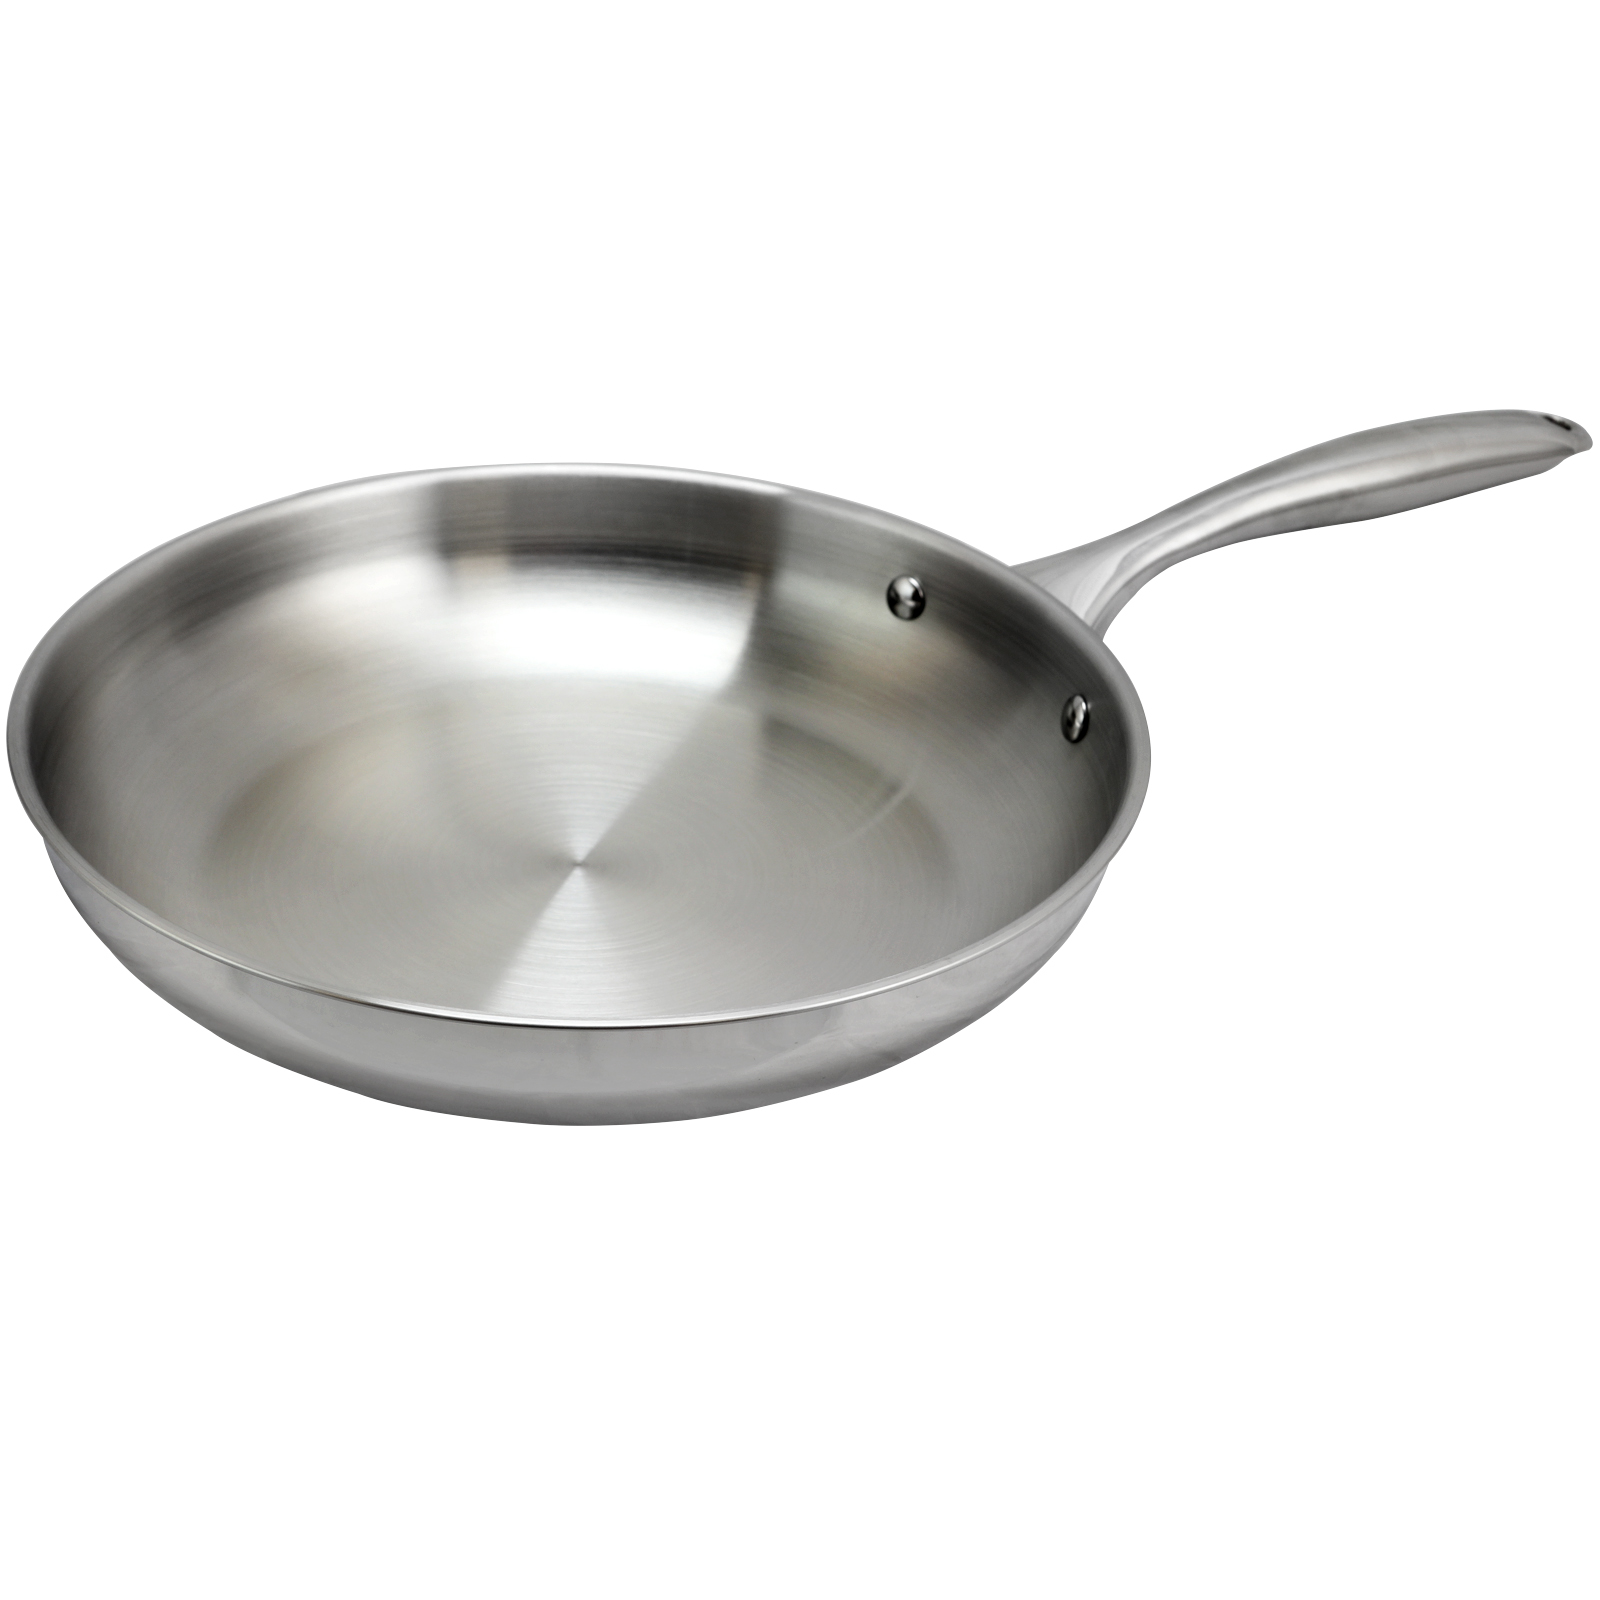 Oster Saunders 10 inch Stainless Steel Frying Pan